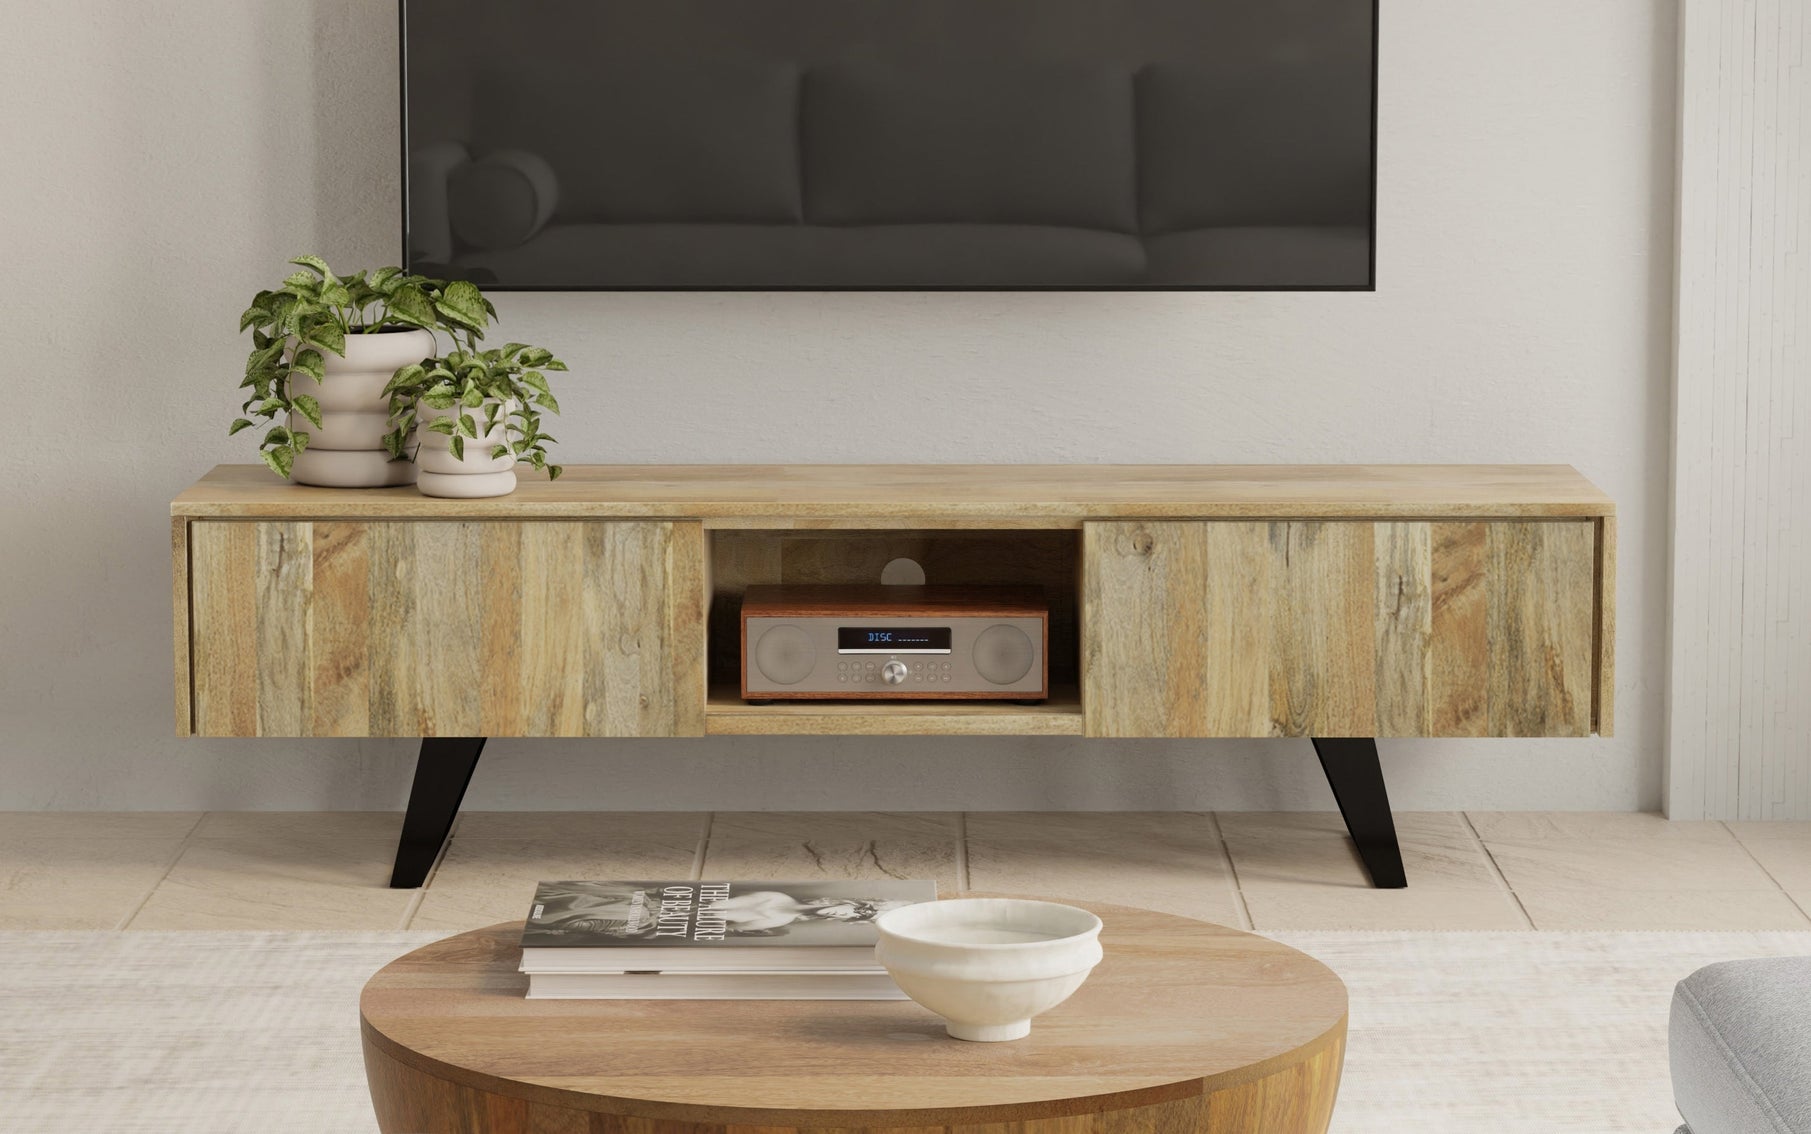 Natural Mango | Lowry 72 inch TV Media Stand